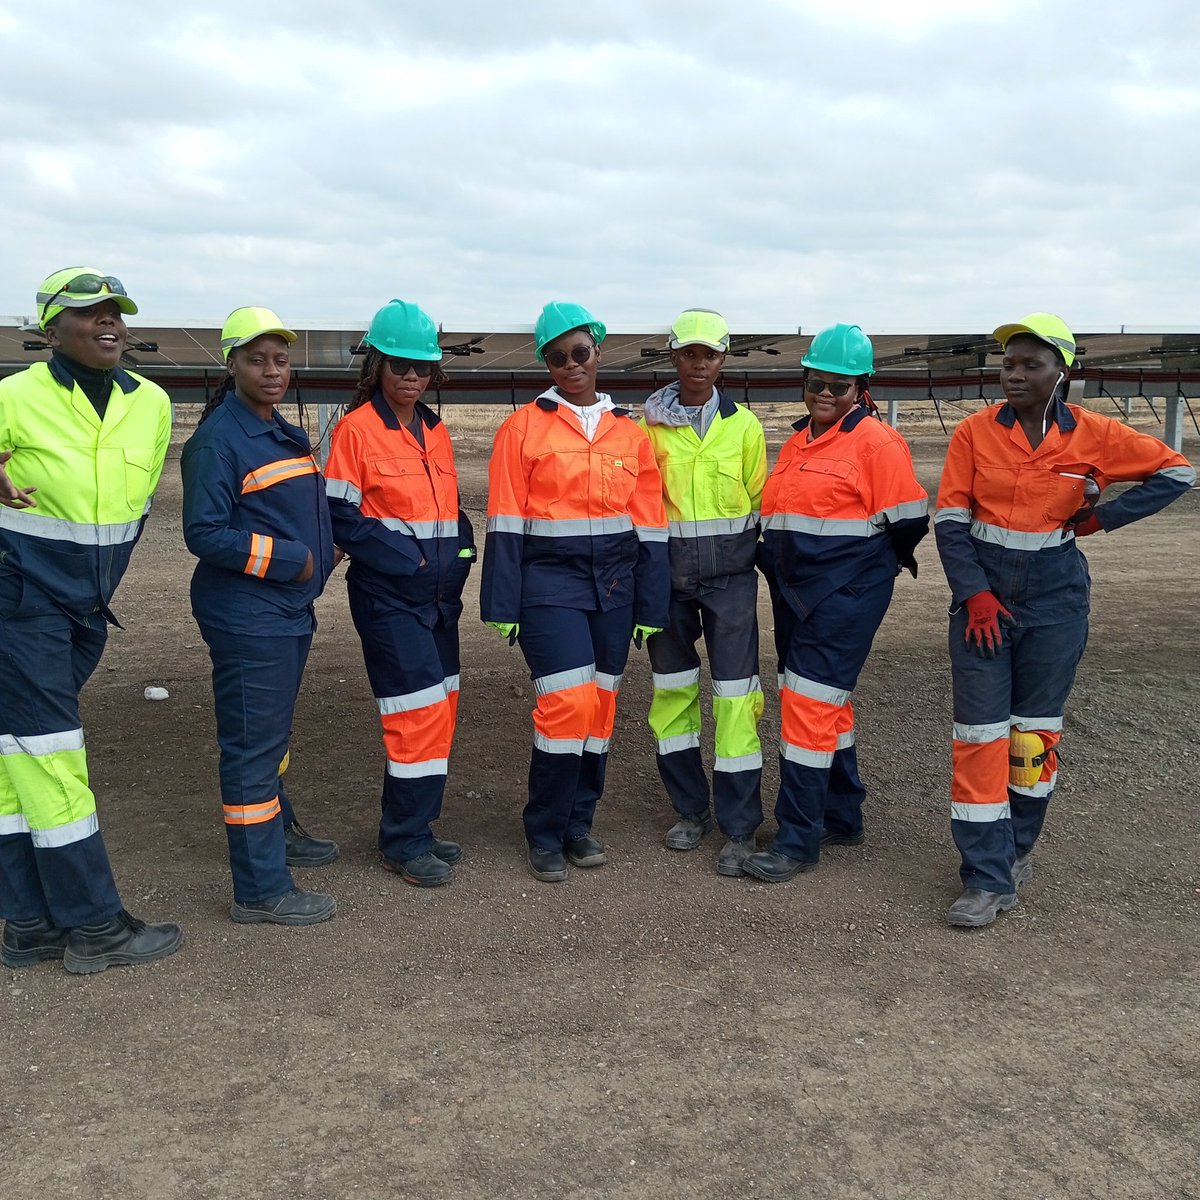 It was great welcoming our new members on site from #UofB
#womeninenergy
#supporting Botswana's #cleanenergytransition 💡